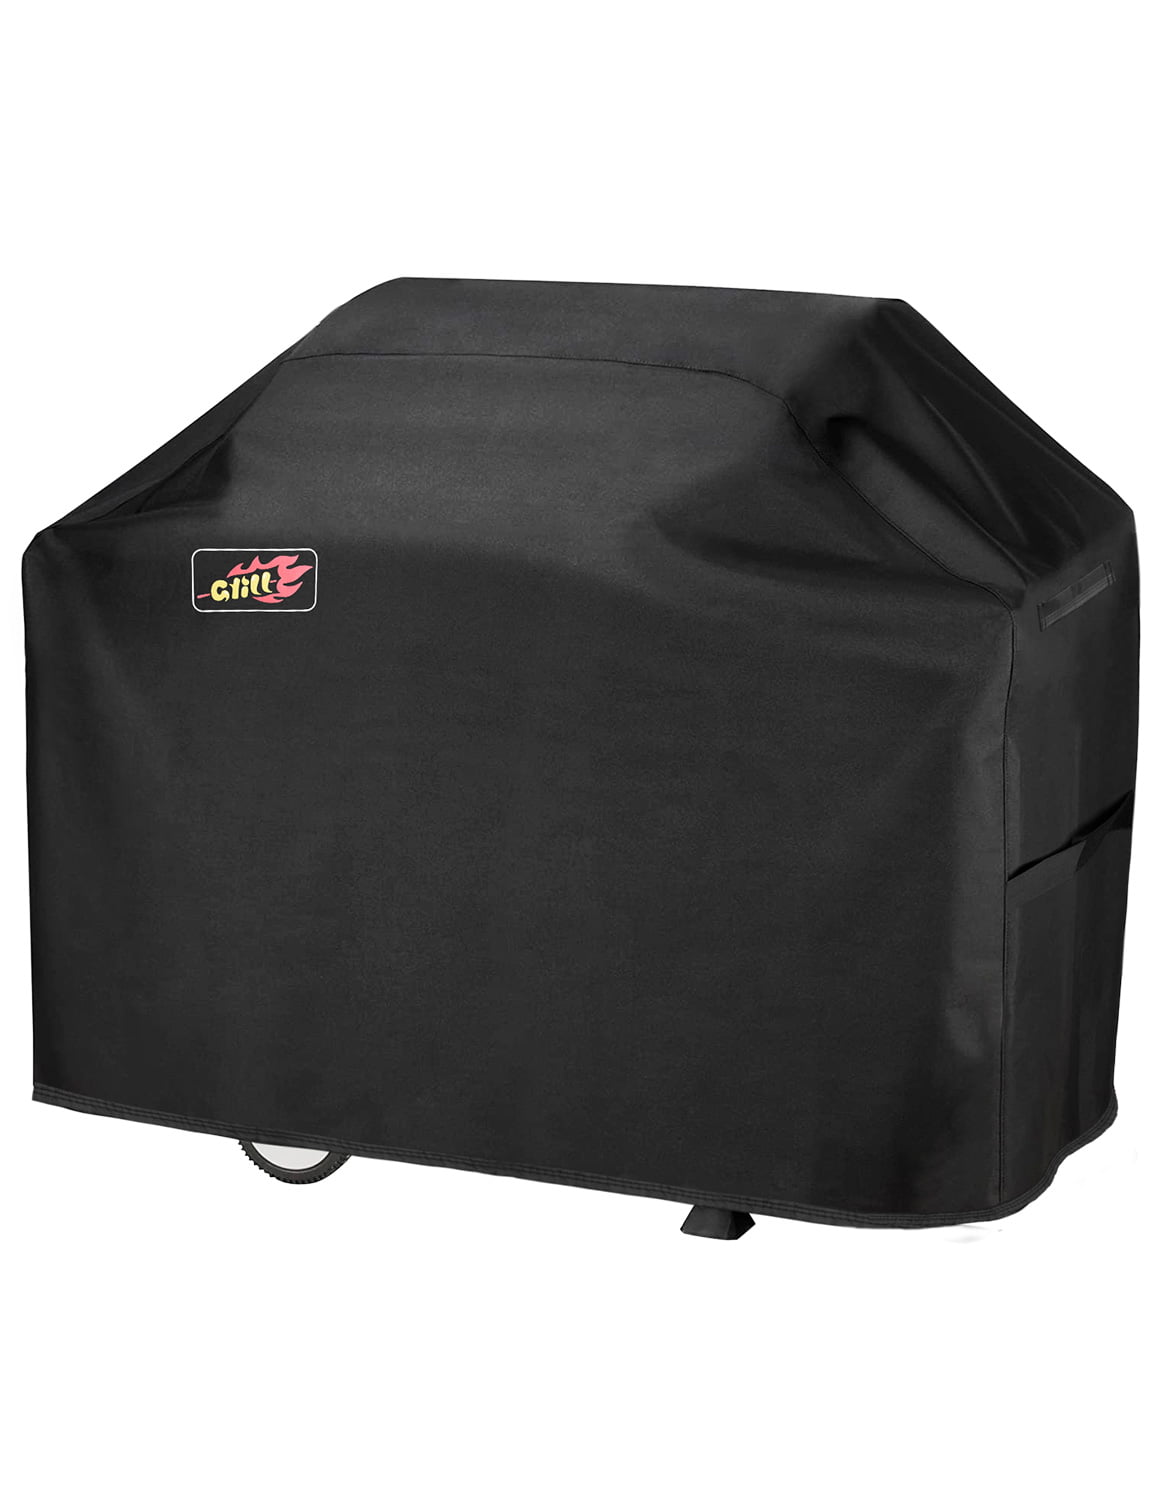 66 Heavy Duty Waterproof Gas Grill Cover fits Weber Char-Broil Coleman Gas Grill-Black 